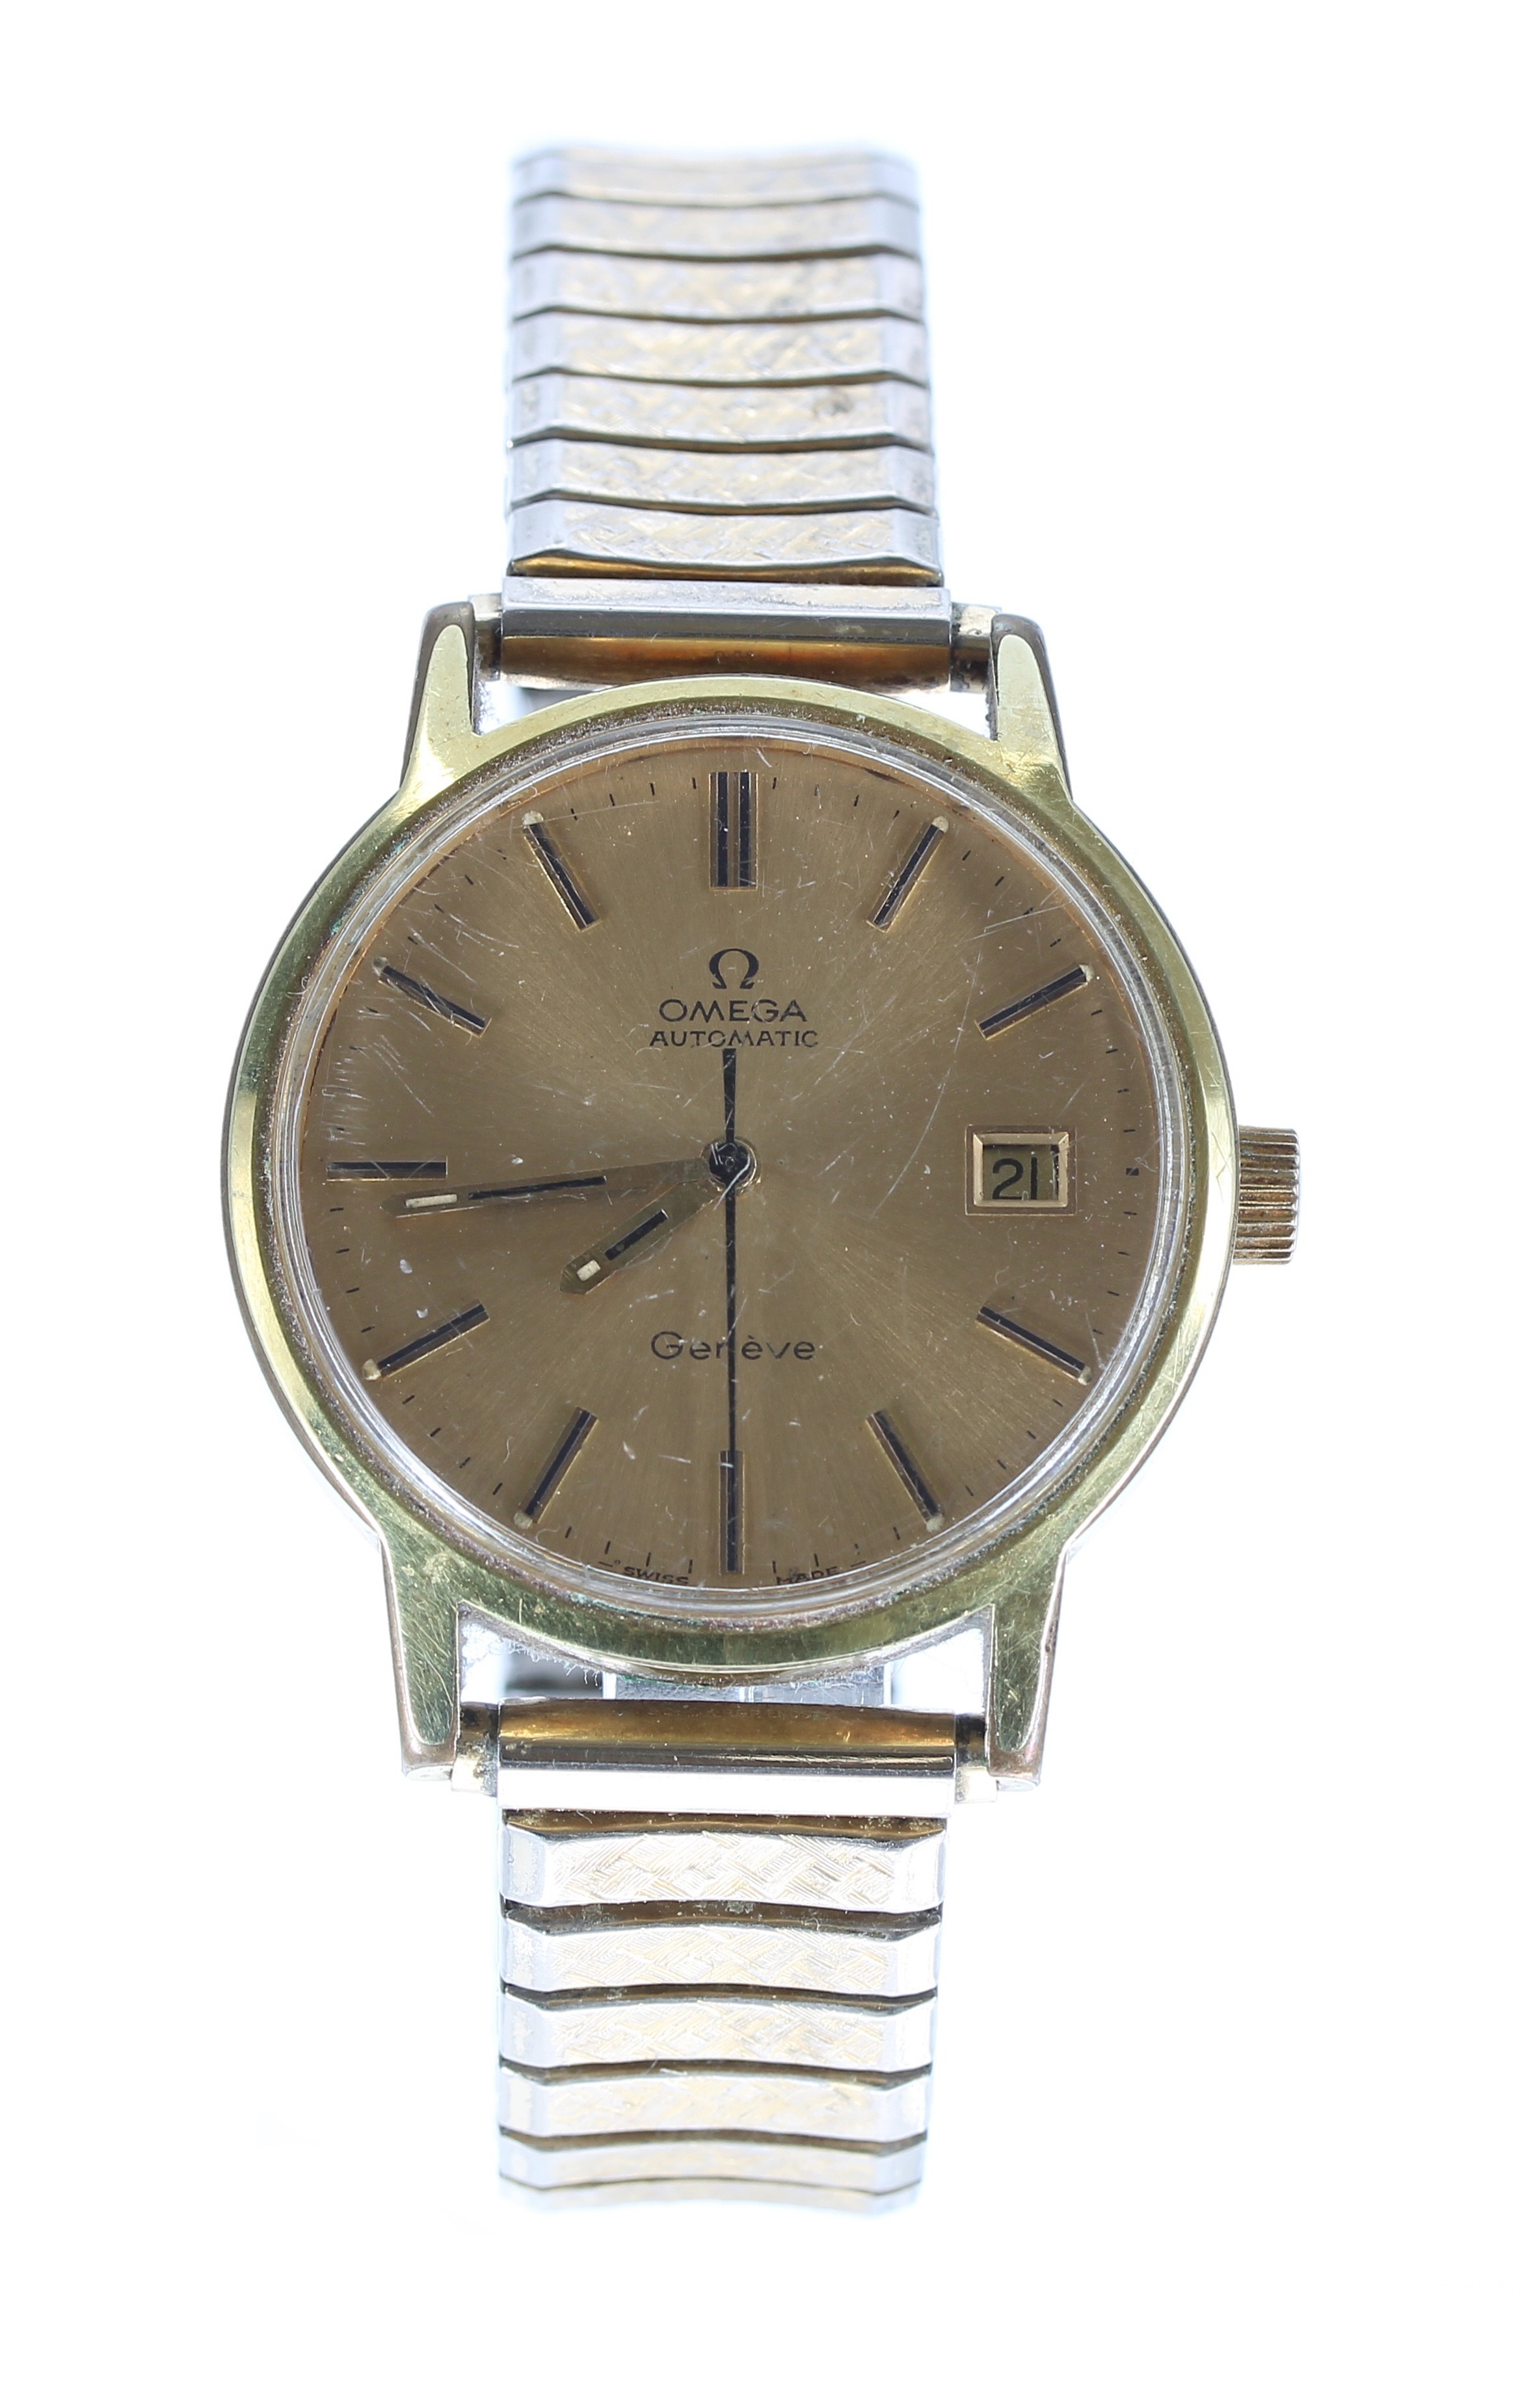 Omega Genève automatic gold plated and stainless steel gentleman's wristwatch, reference no. 166098,